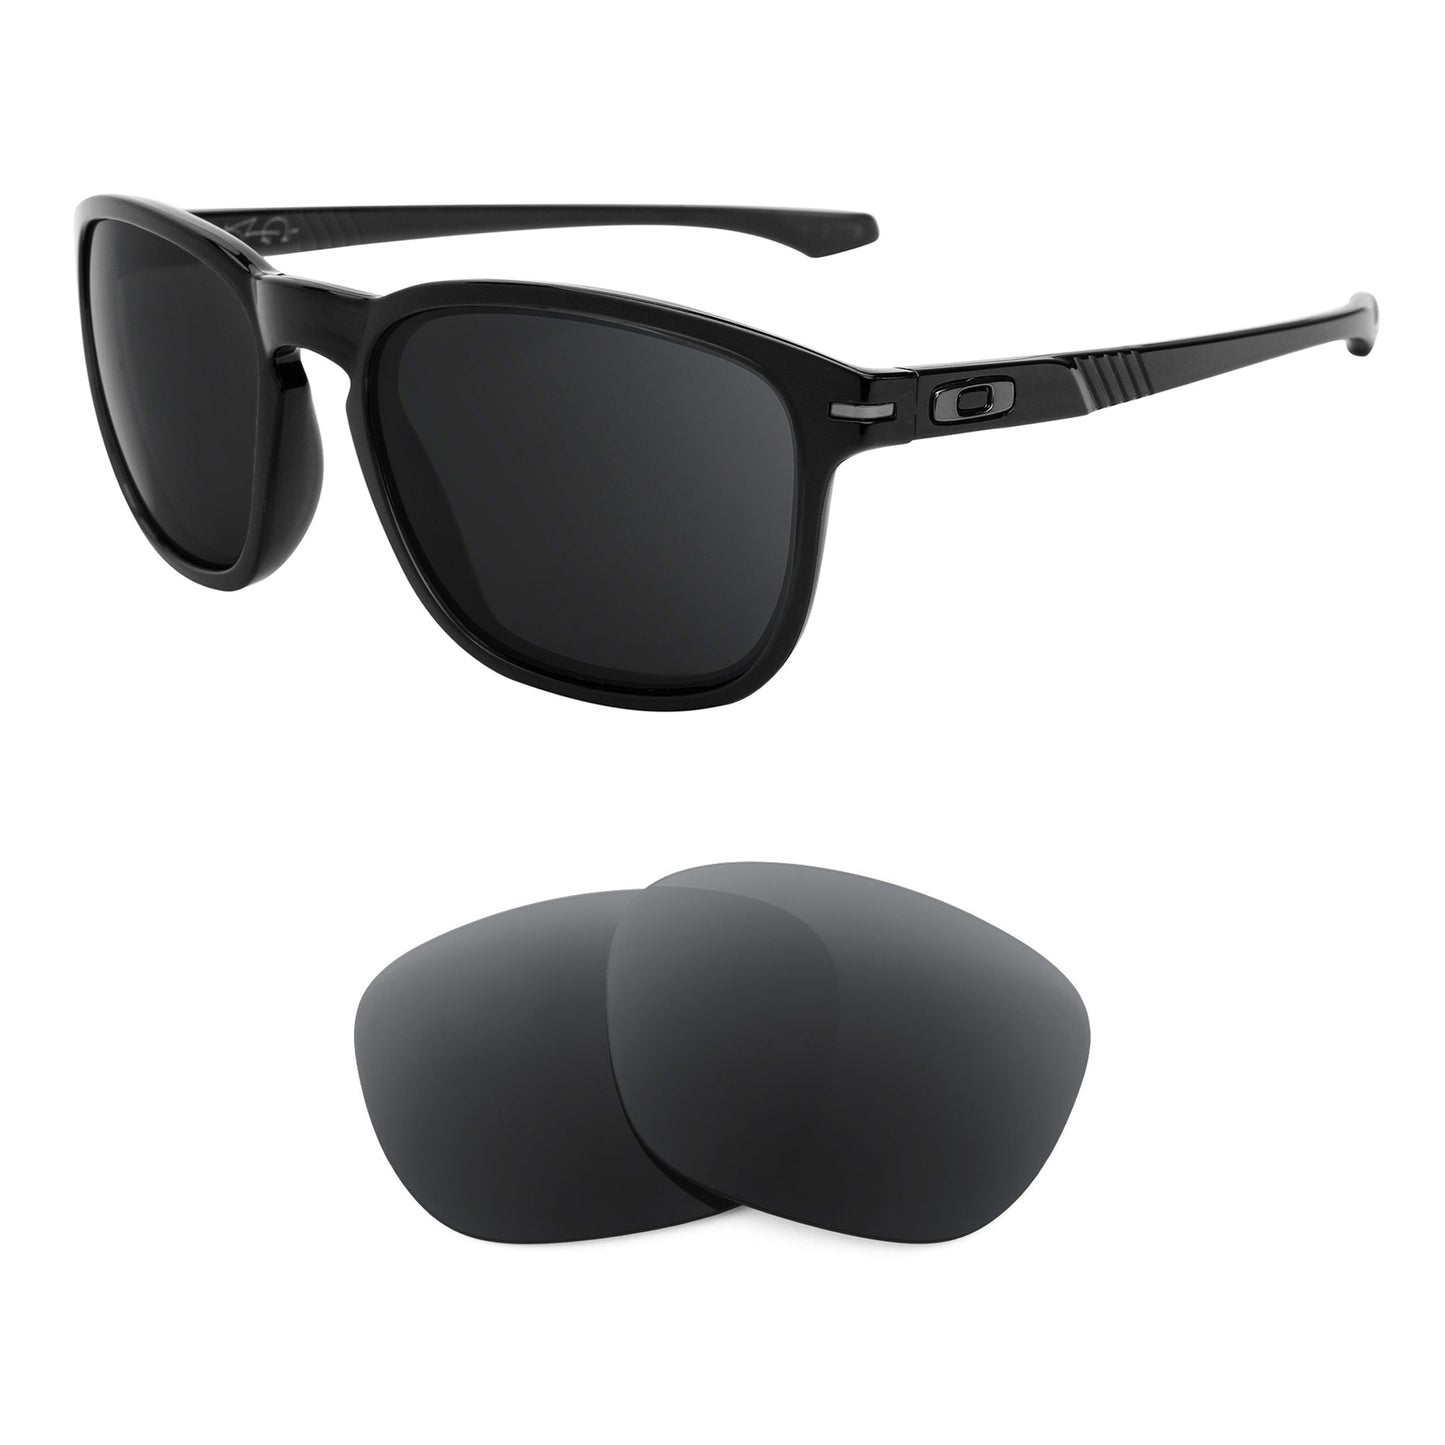 Oakley Enduro sunglasses with replacement lenses